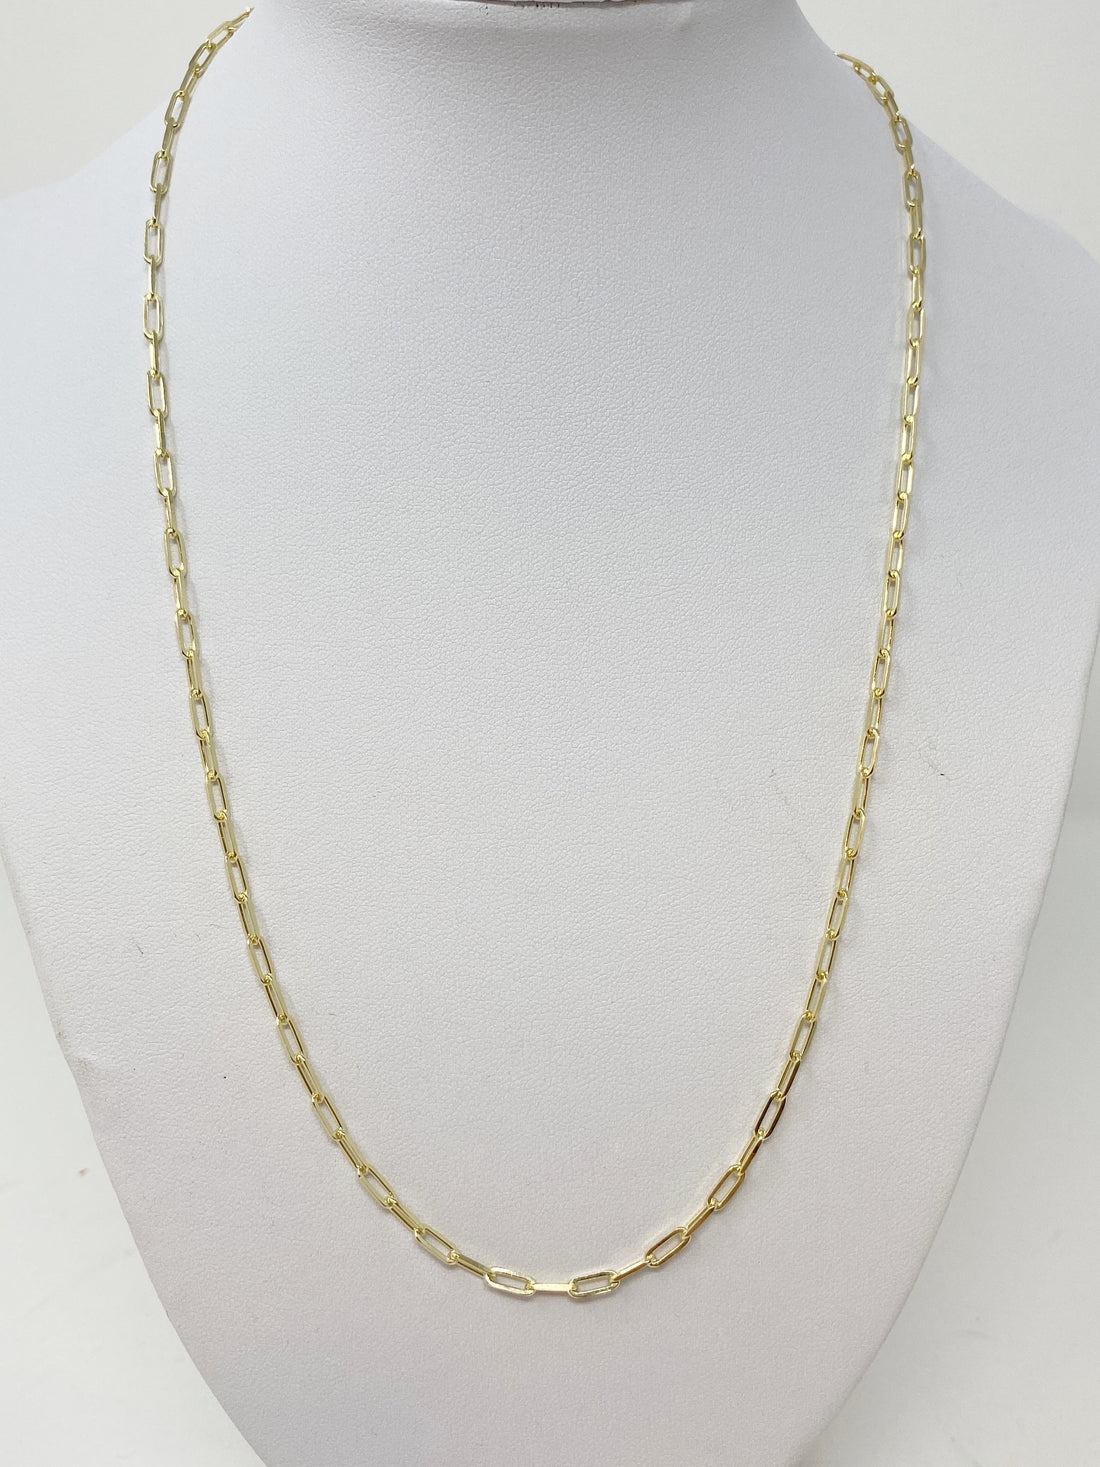 Charming Chainlink Necklace in Gold 20"